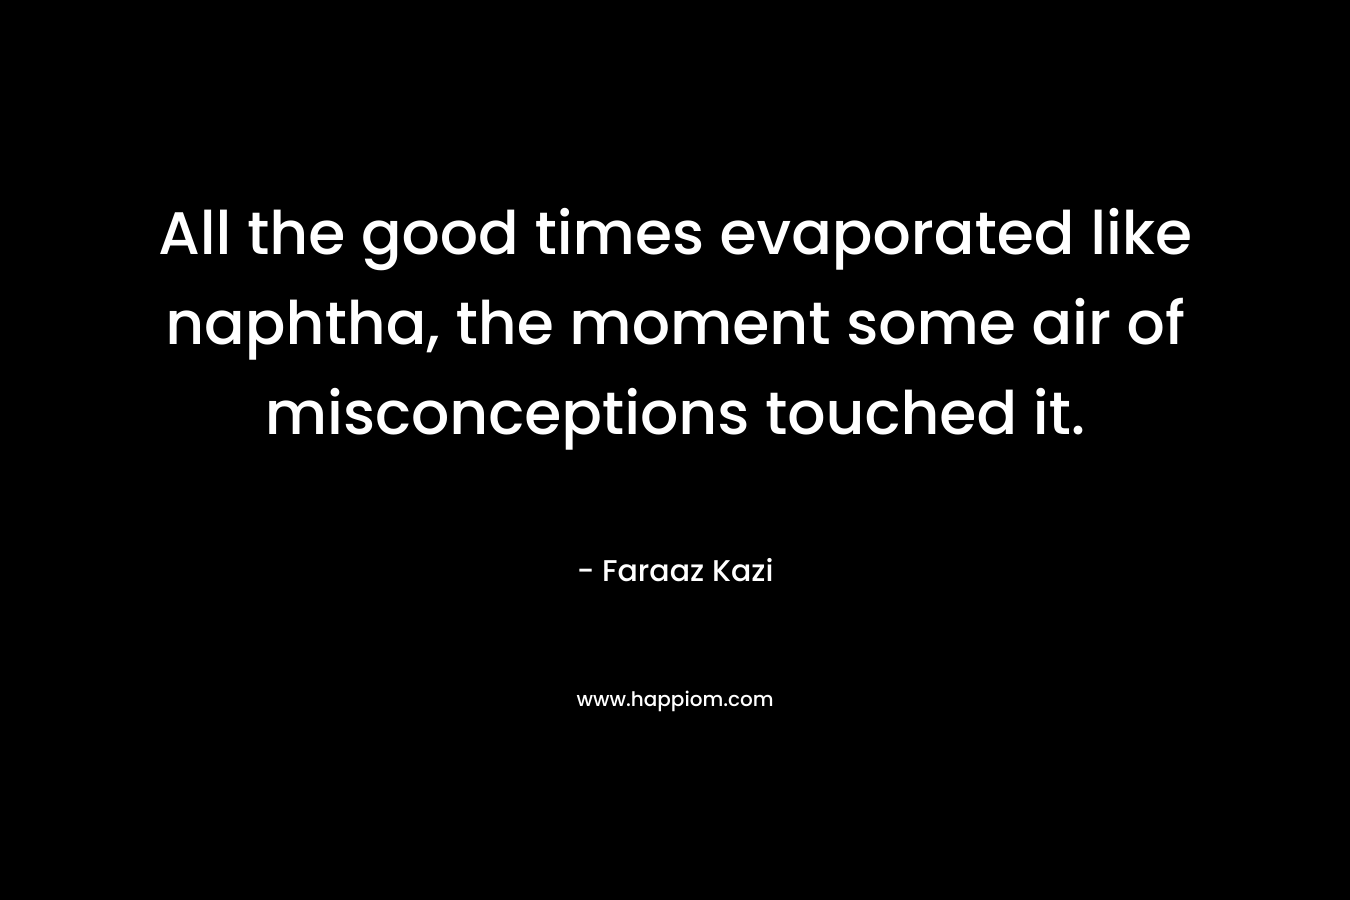 All the good times evaporated like naphtha, the moment some air of misconceptions touched it. – Faraaz Kazi